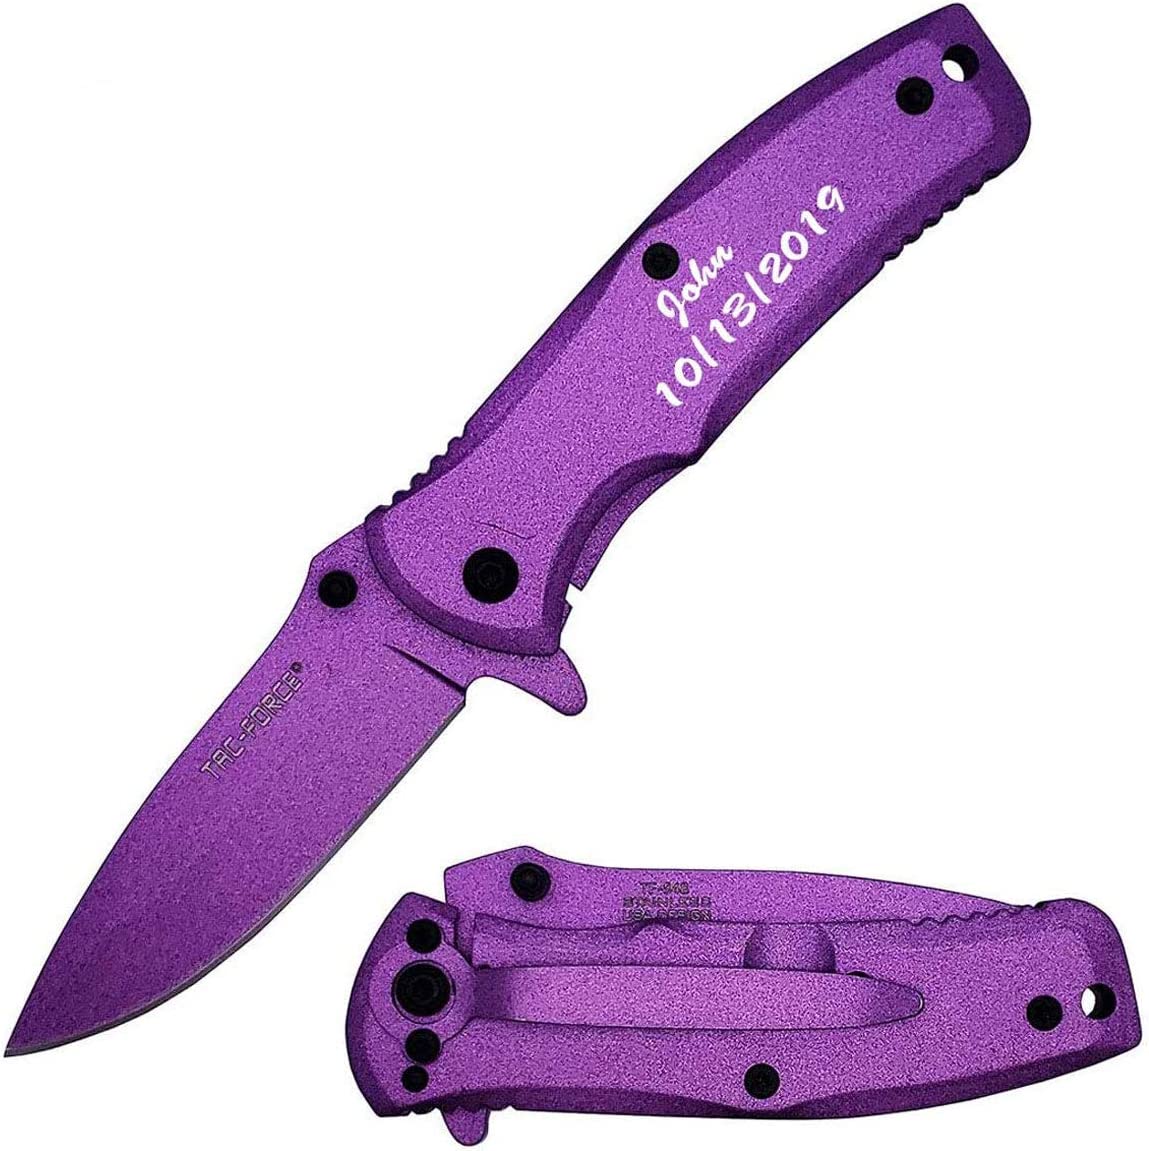 GIFTS INFINITY - Titanium Coated Open Assist Stainless Steel Quality Pocket Knife – Purple